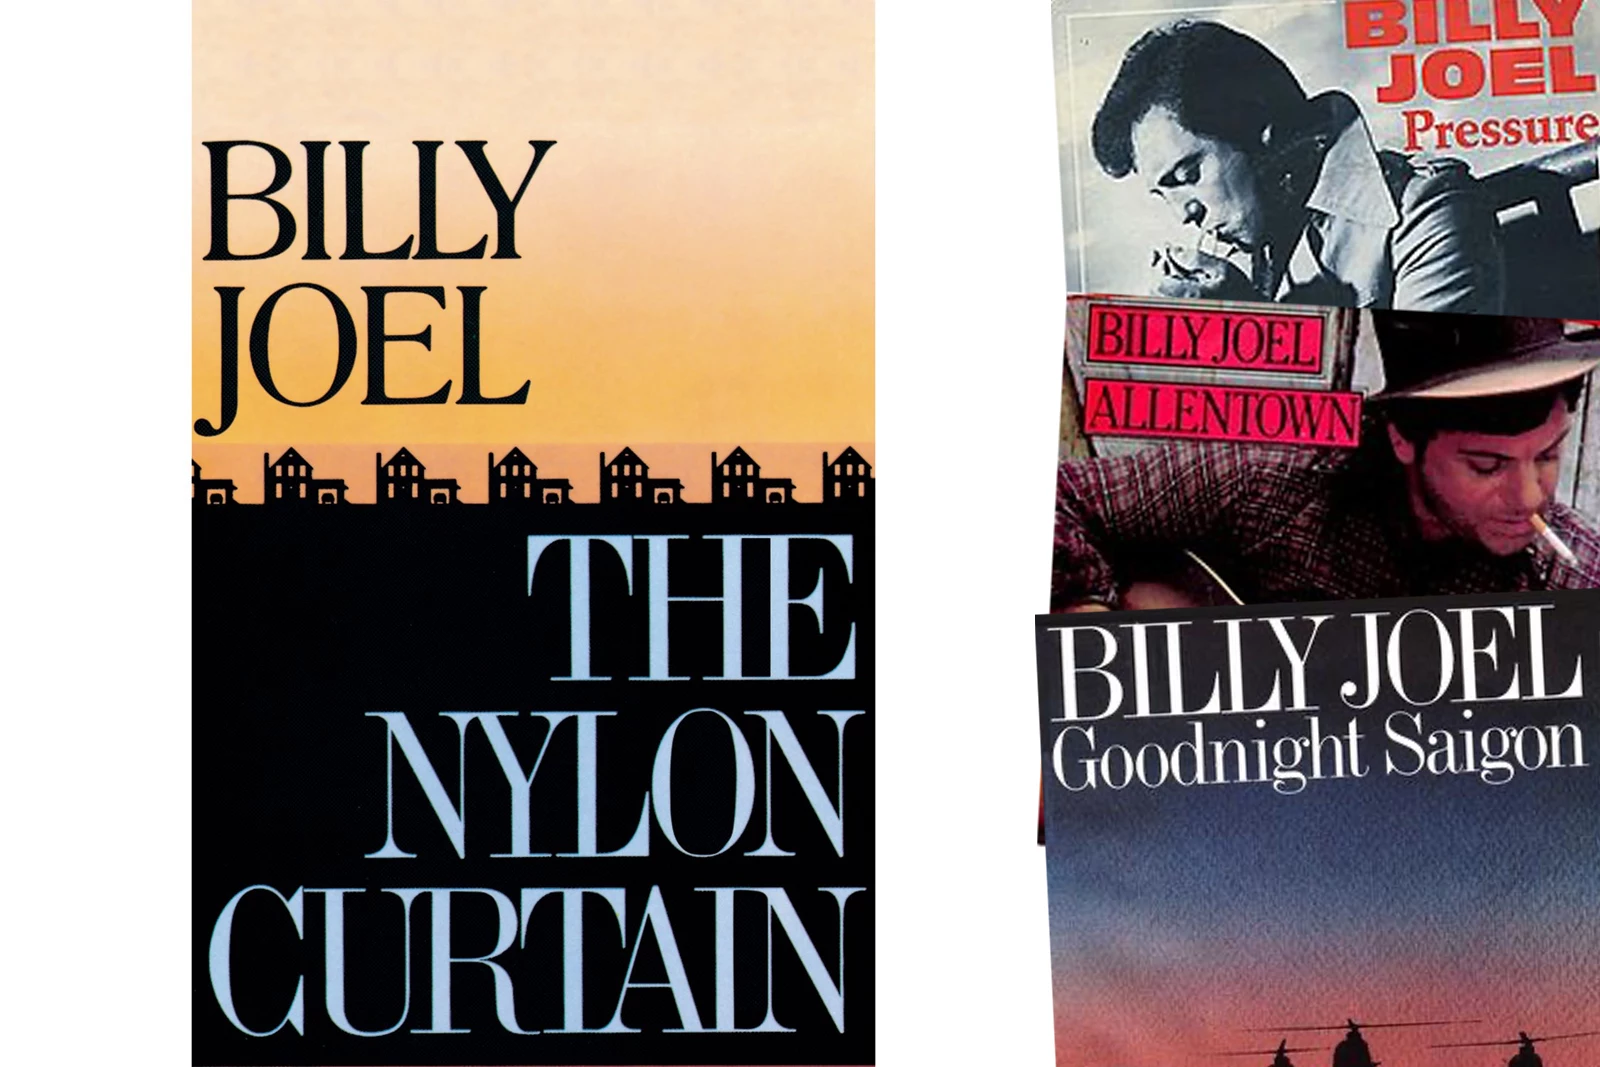 How the Beatles Inspired Billy Joel's 'The Nylon Curtain'